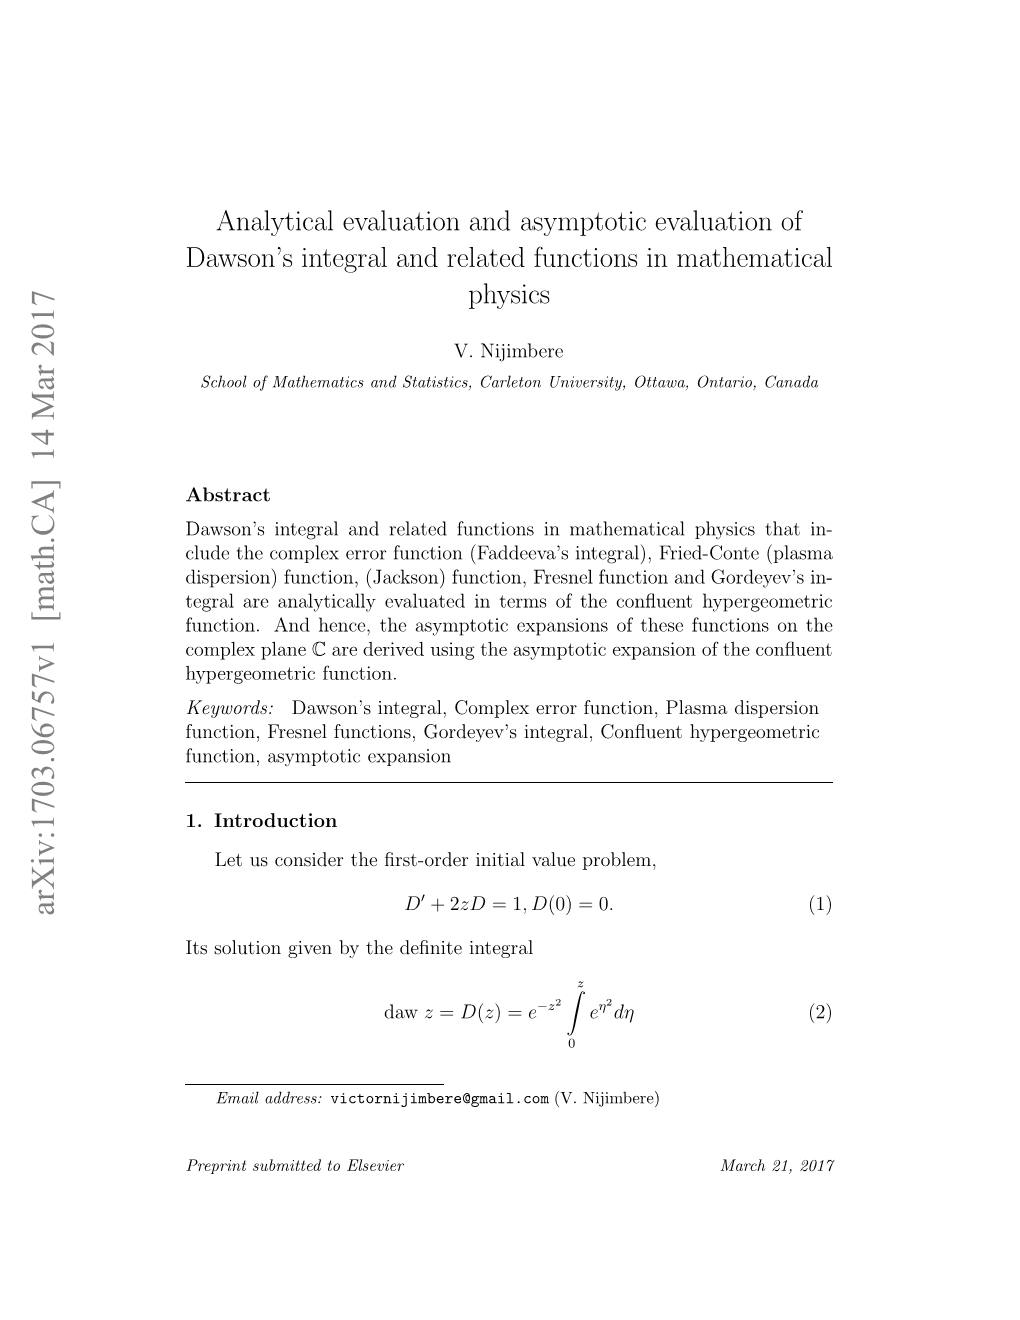 Analytical Evaluation and Asymptotic Evaluation of Dawson's Integral And